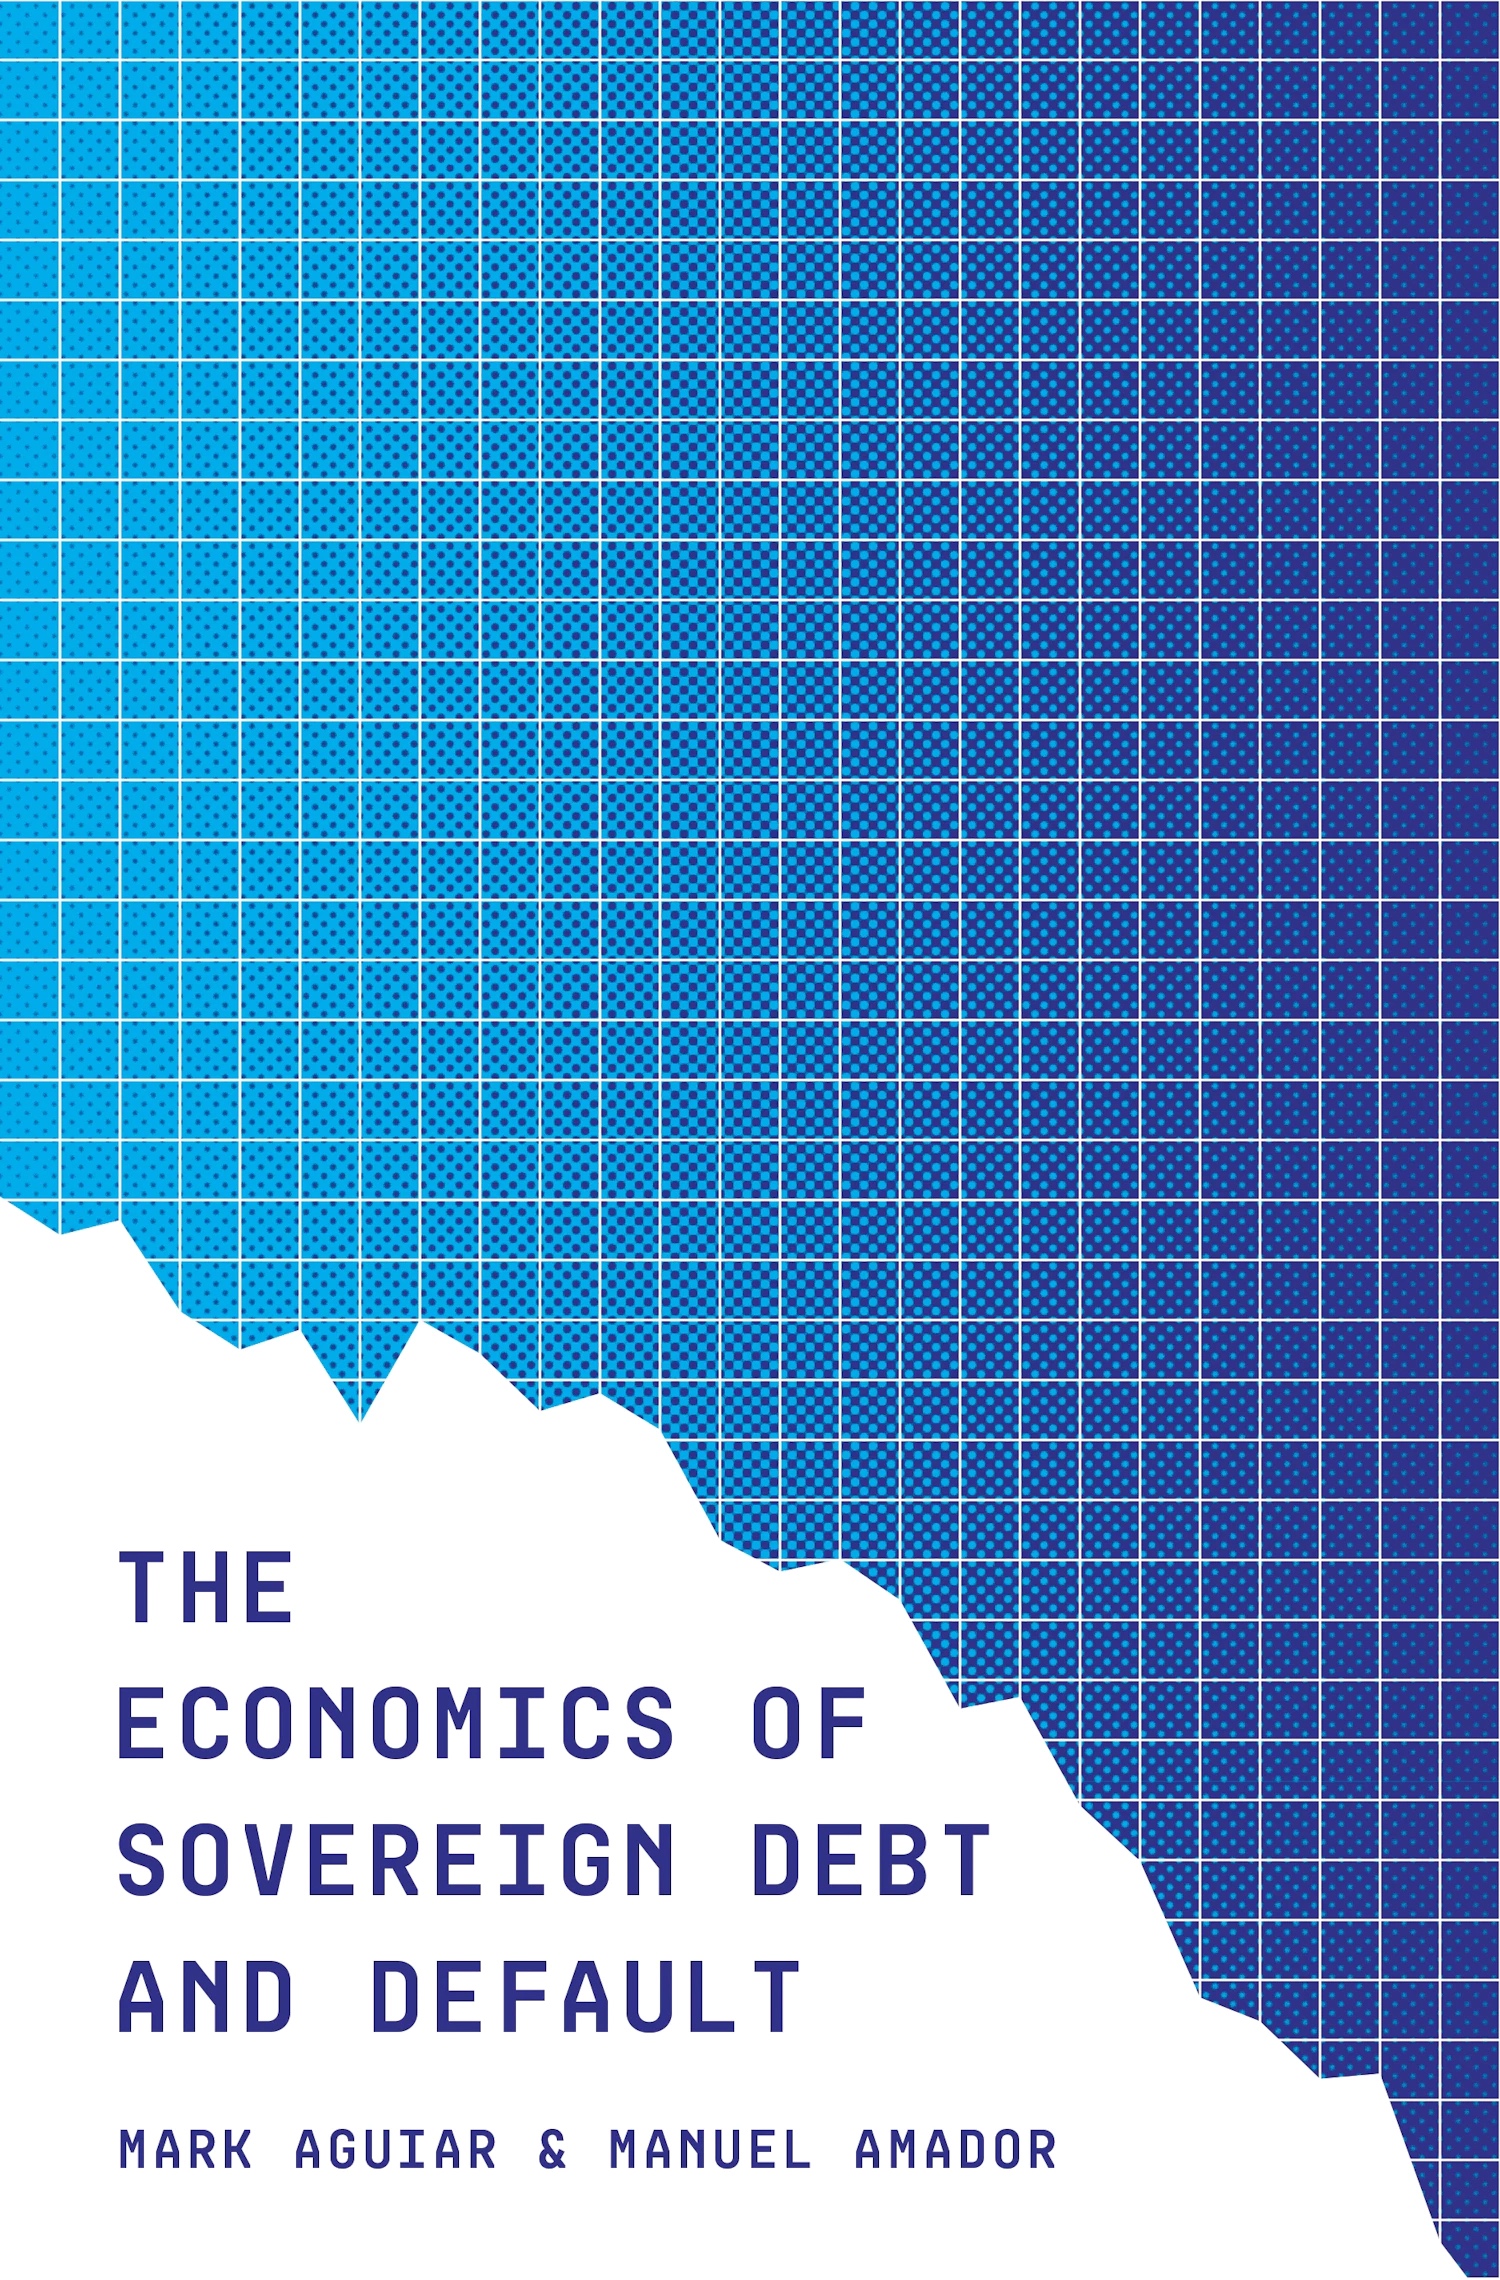 Book cover titled The Economics of Sovereign Debt and Default by Mark Aguiar and Manuel Amador